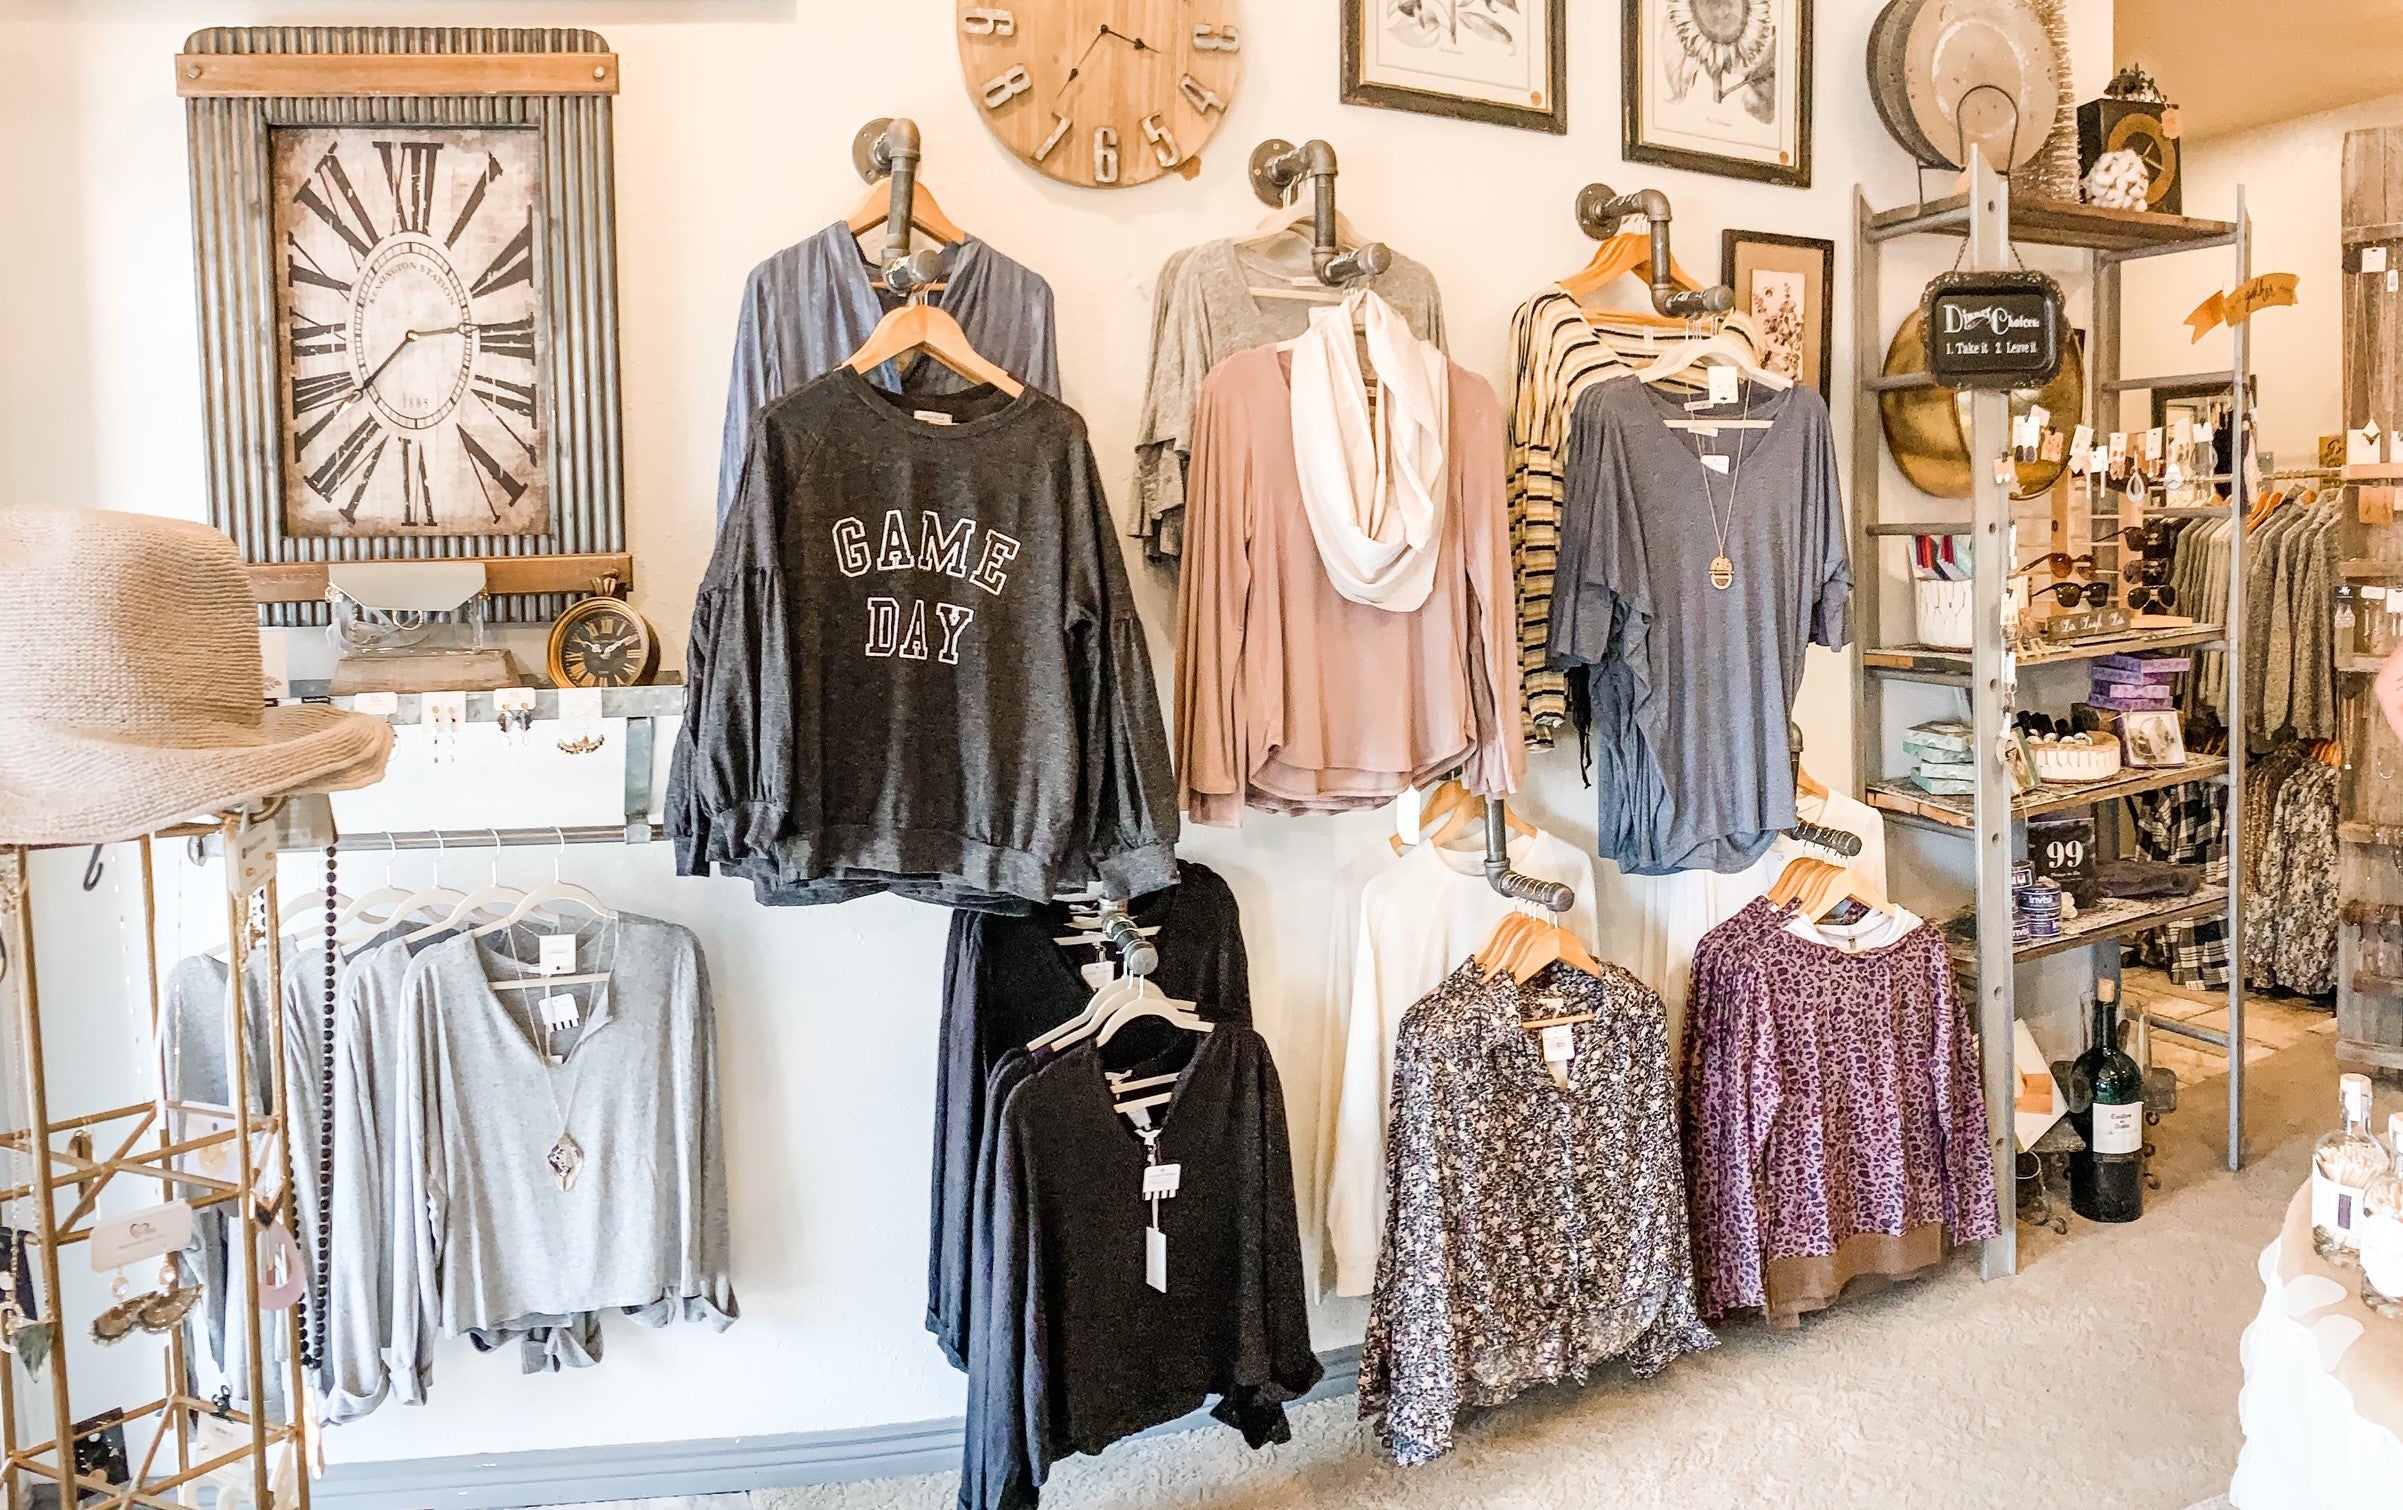 5 Trendy High-End Clothing Boutiques Near St. Louis Park - Kerby